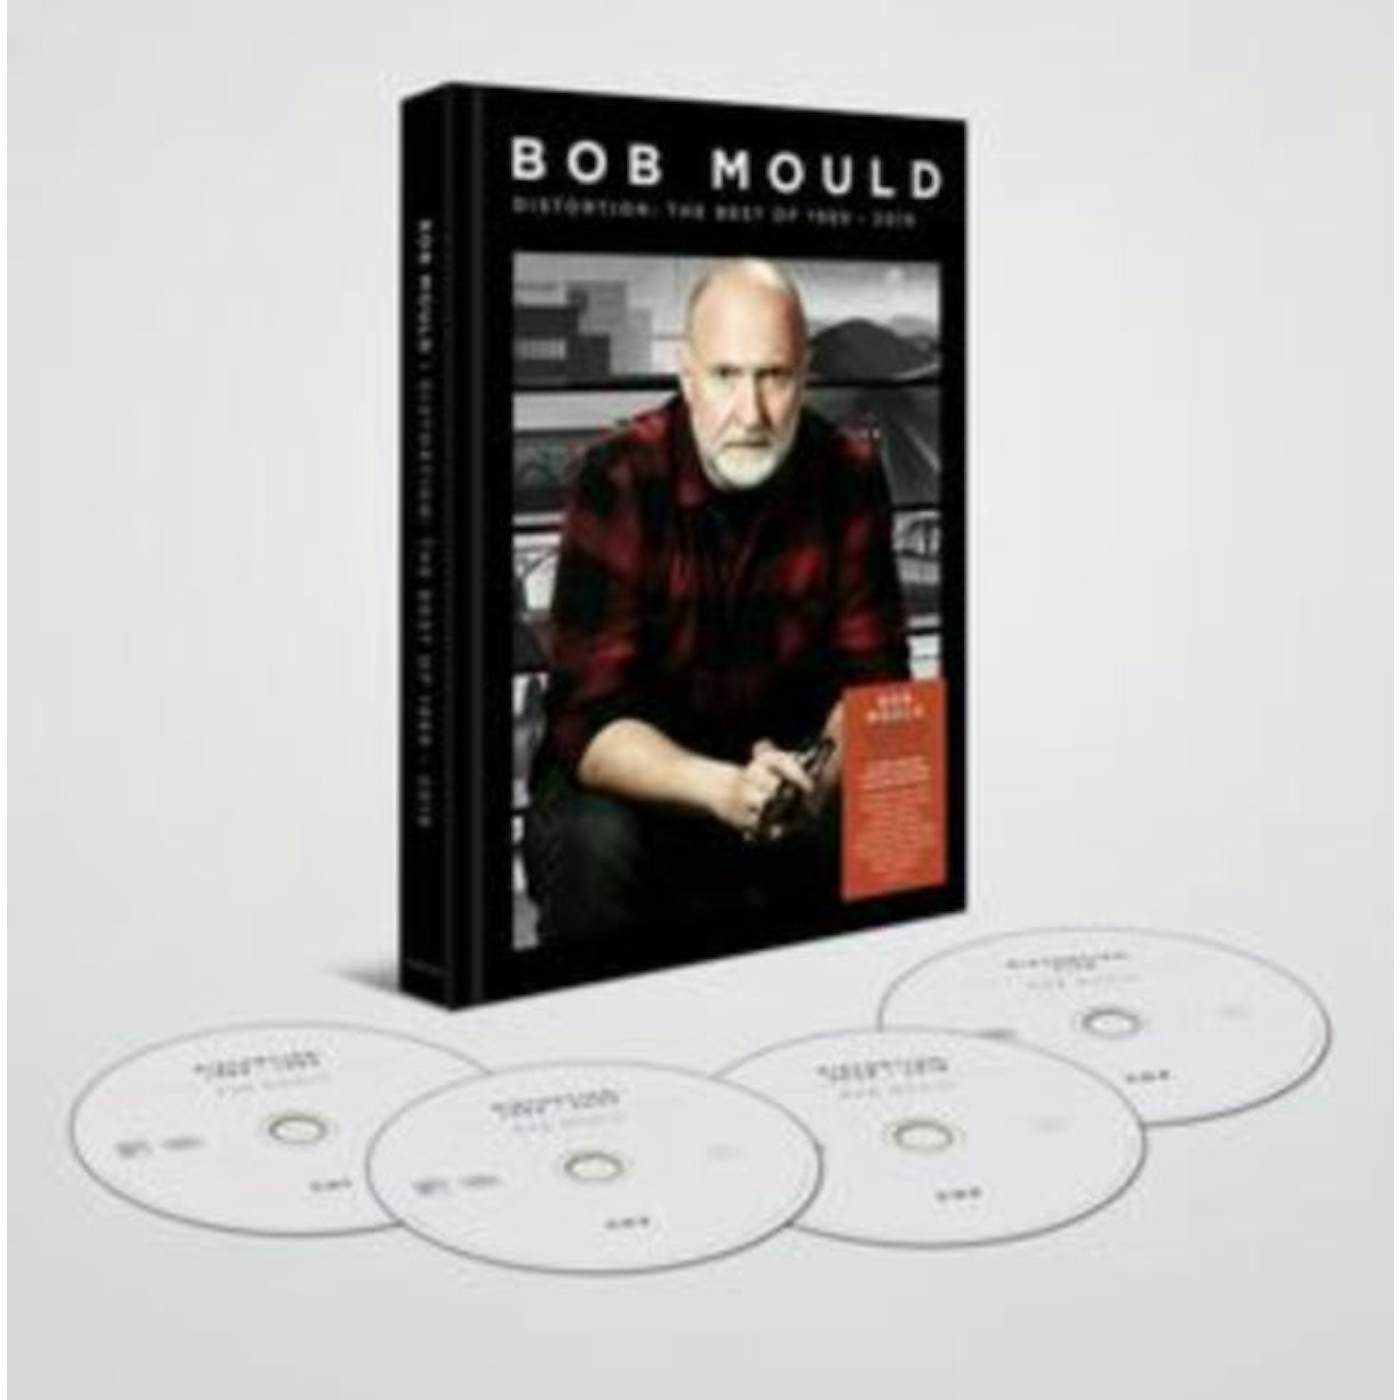 Bob Mould CD - Distortion: The Best Of 19 89-20. 19